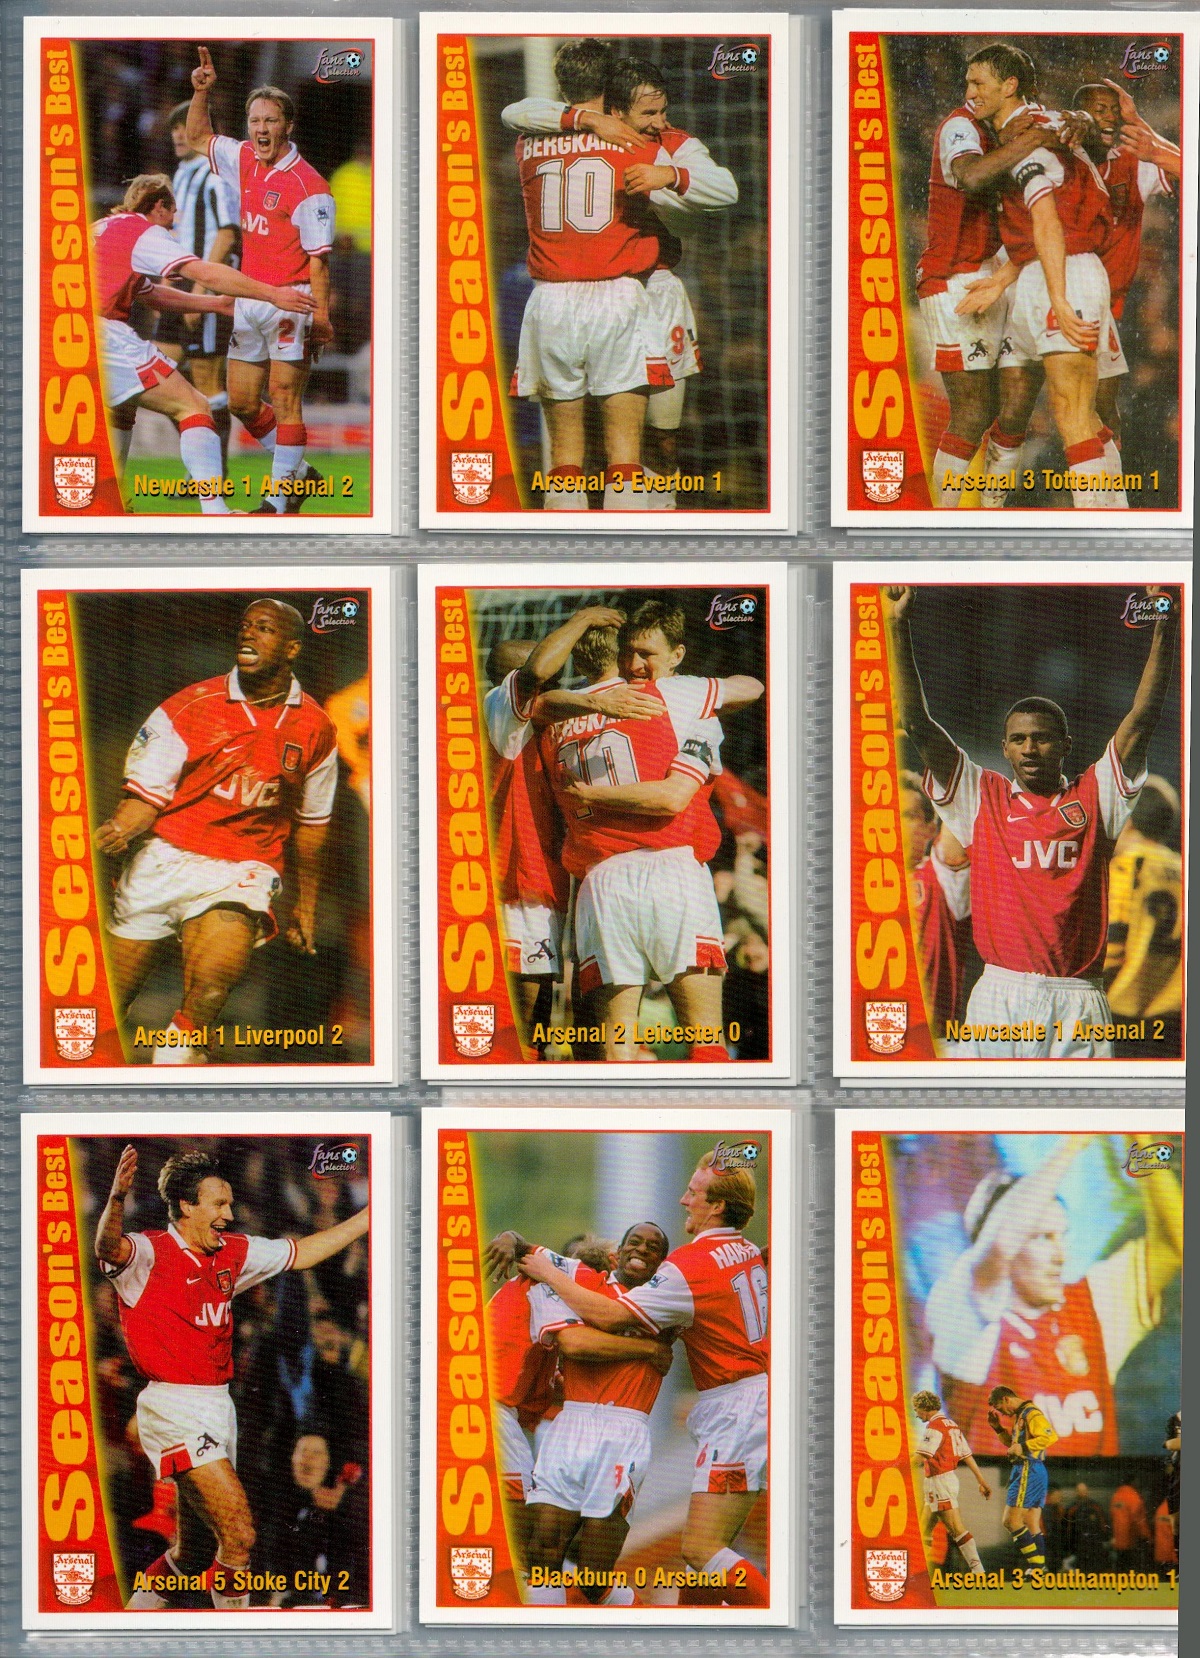 Arsenal FC Trading Card Collectors Album Complete Set from 1997/98 Season. 1-90 Complete Set. - Image 4 of 5